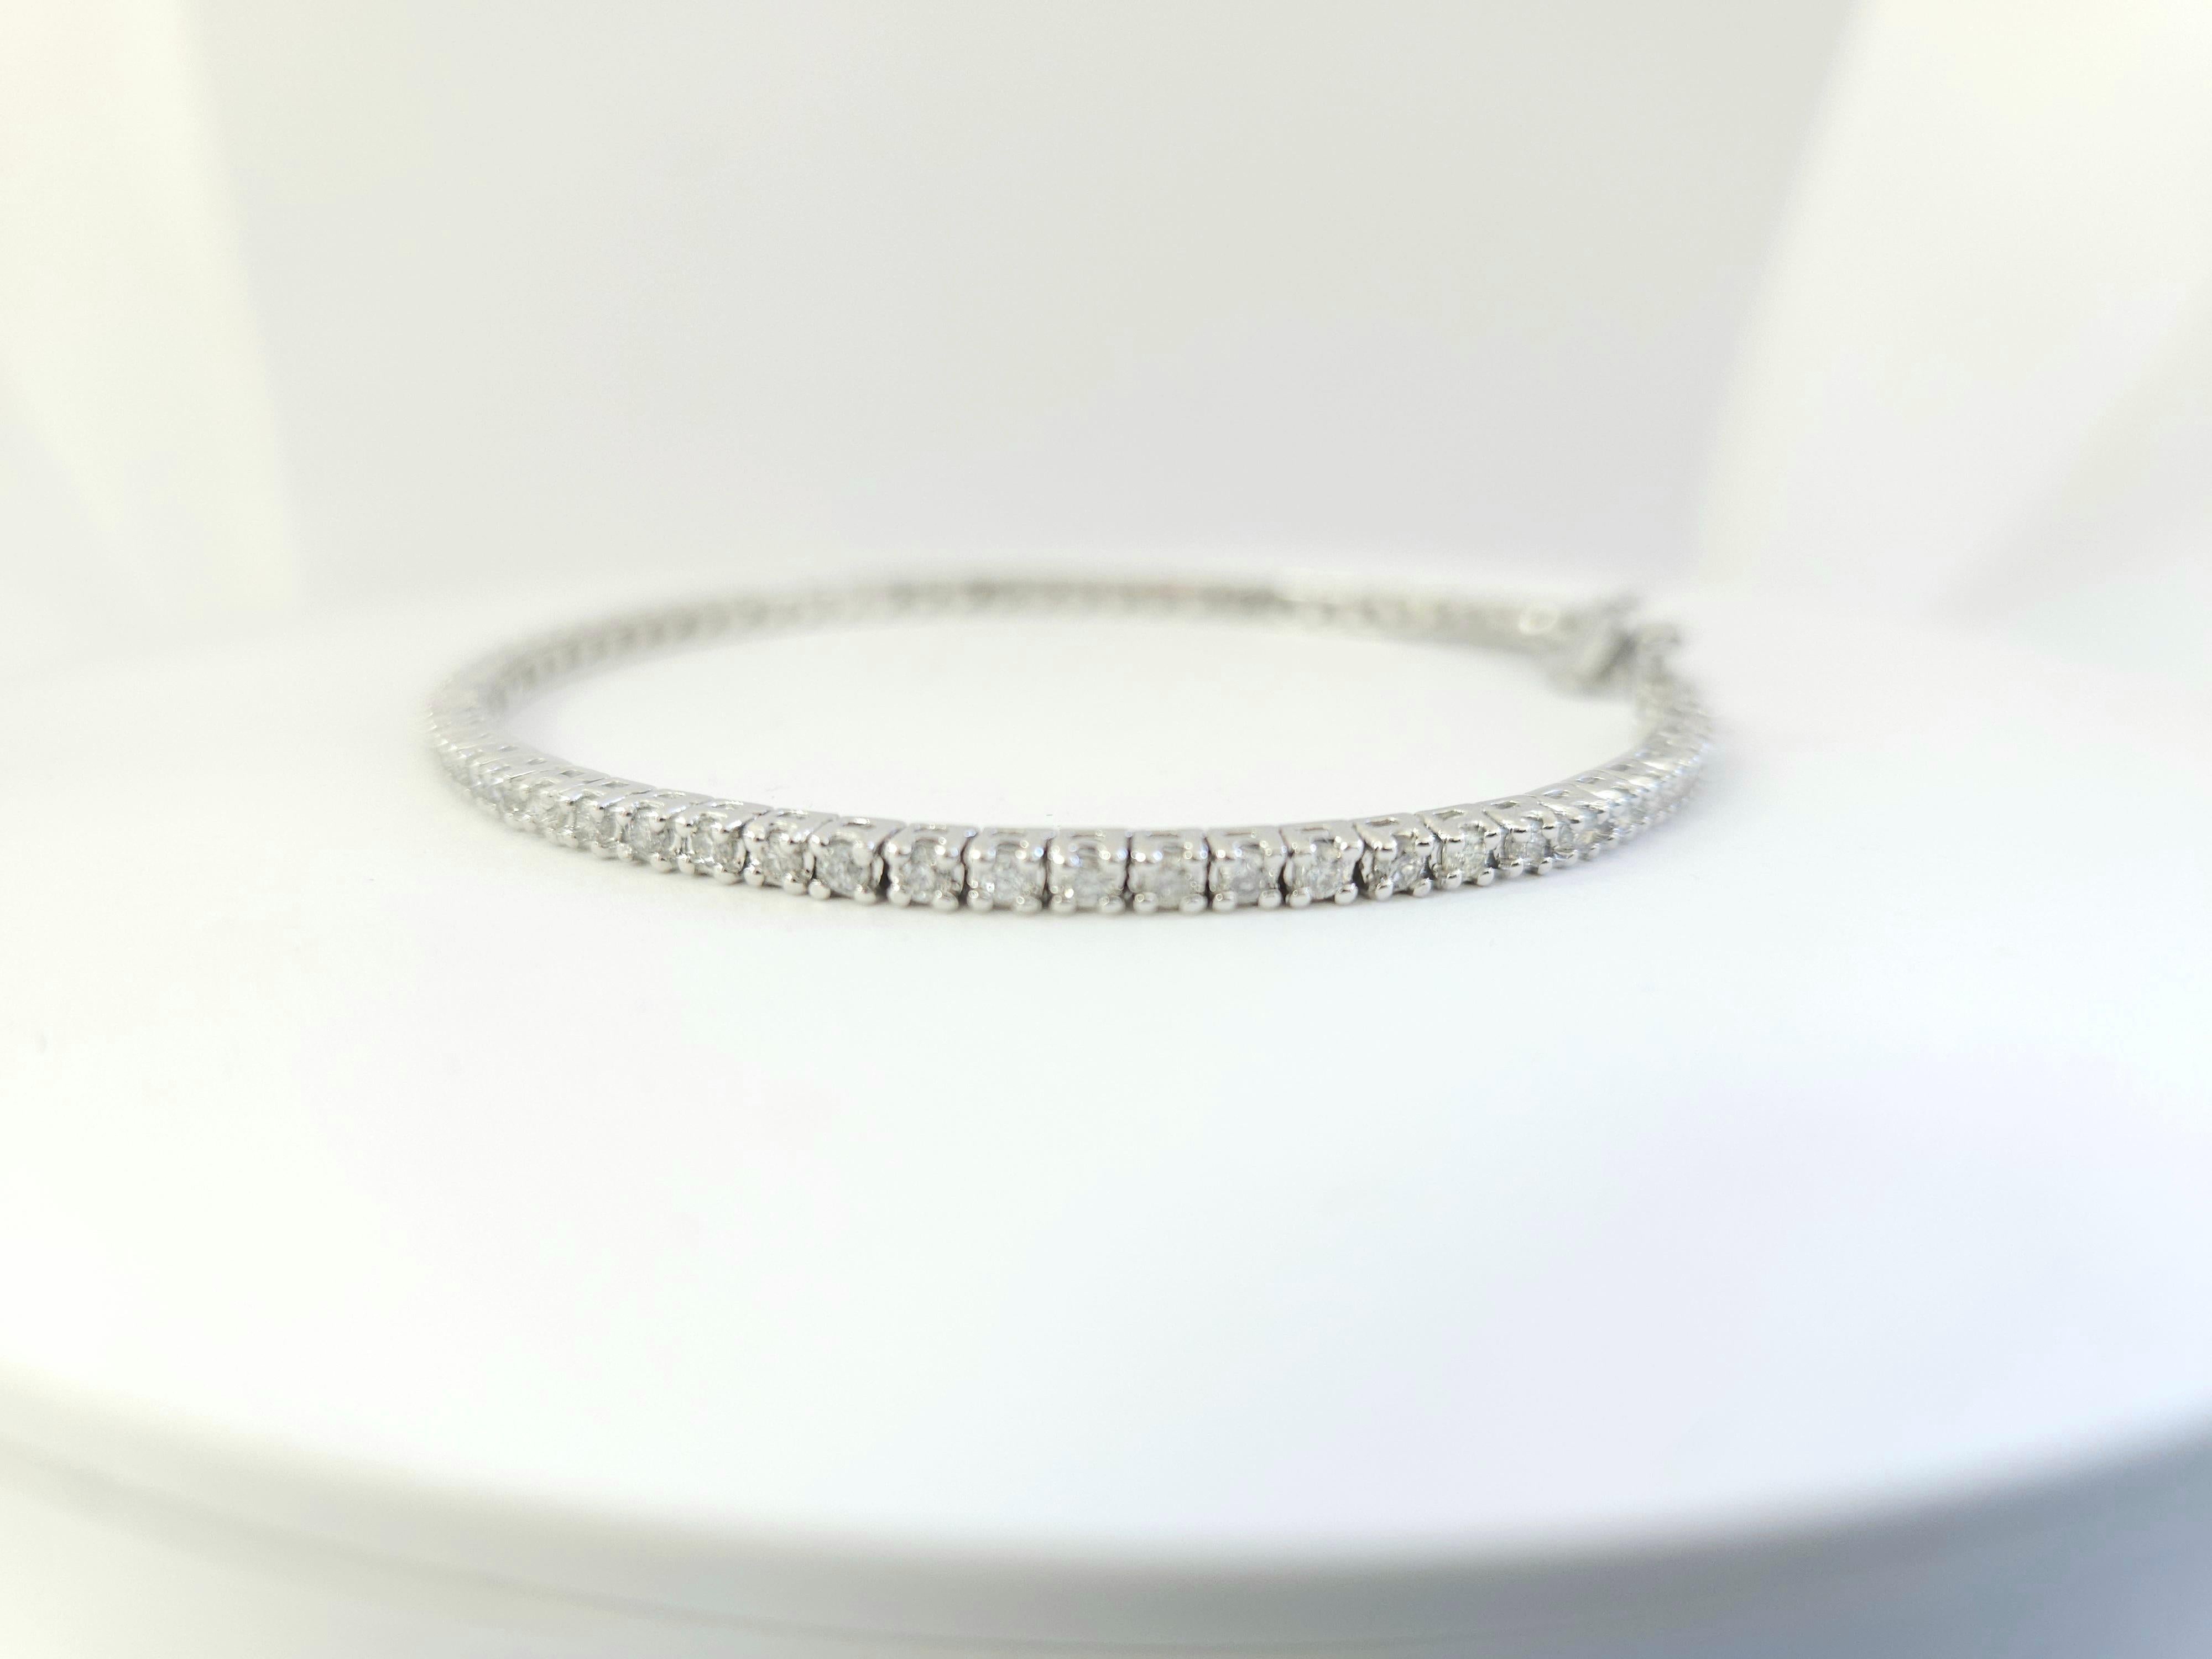 1.86 Carat Round Brilliant Cut Diamond Tennis Bracelet 14 Karat White Gold In New Condition For Sale In Great Neck, NY